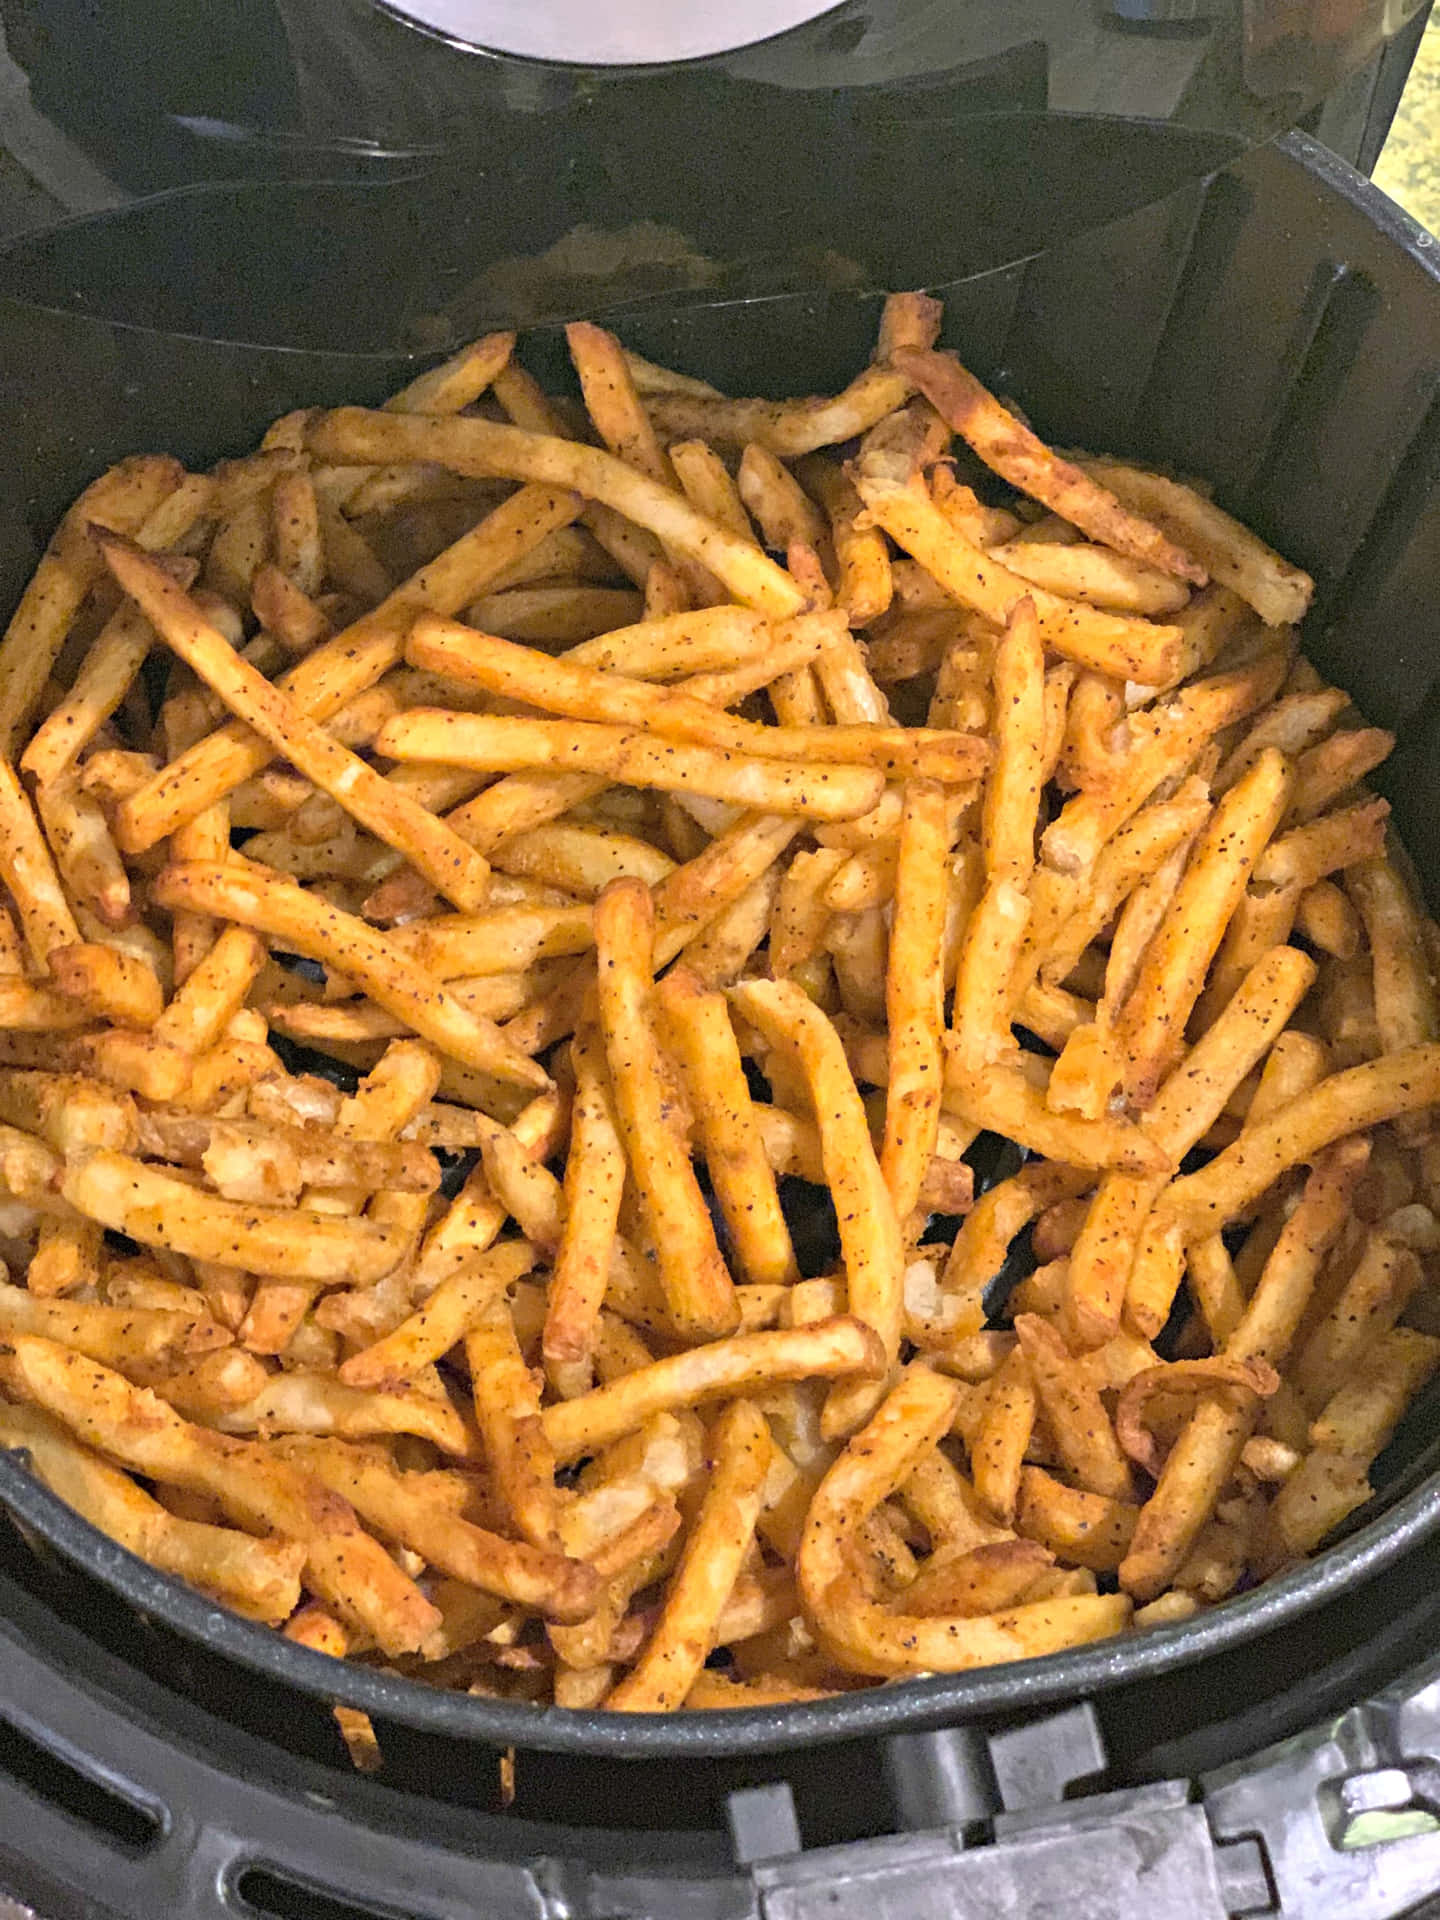 "Golden Delight: Perfectly Fried French Fries"